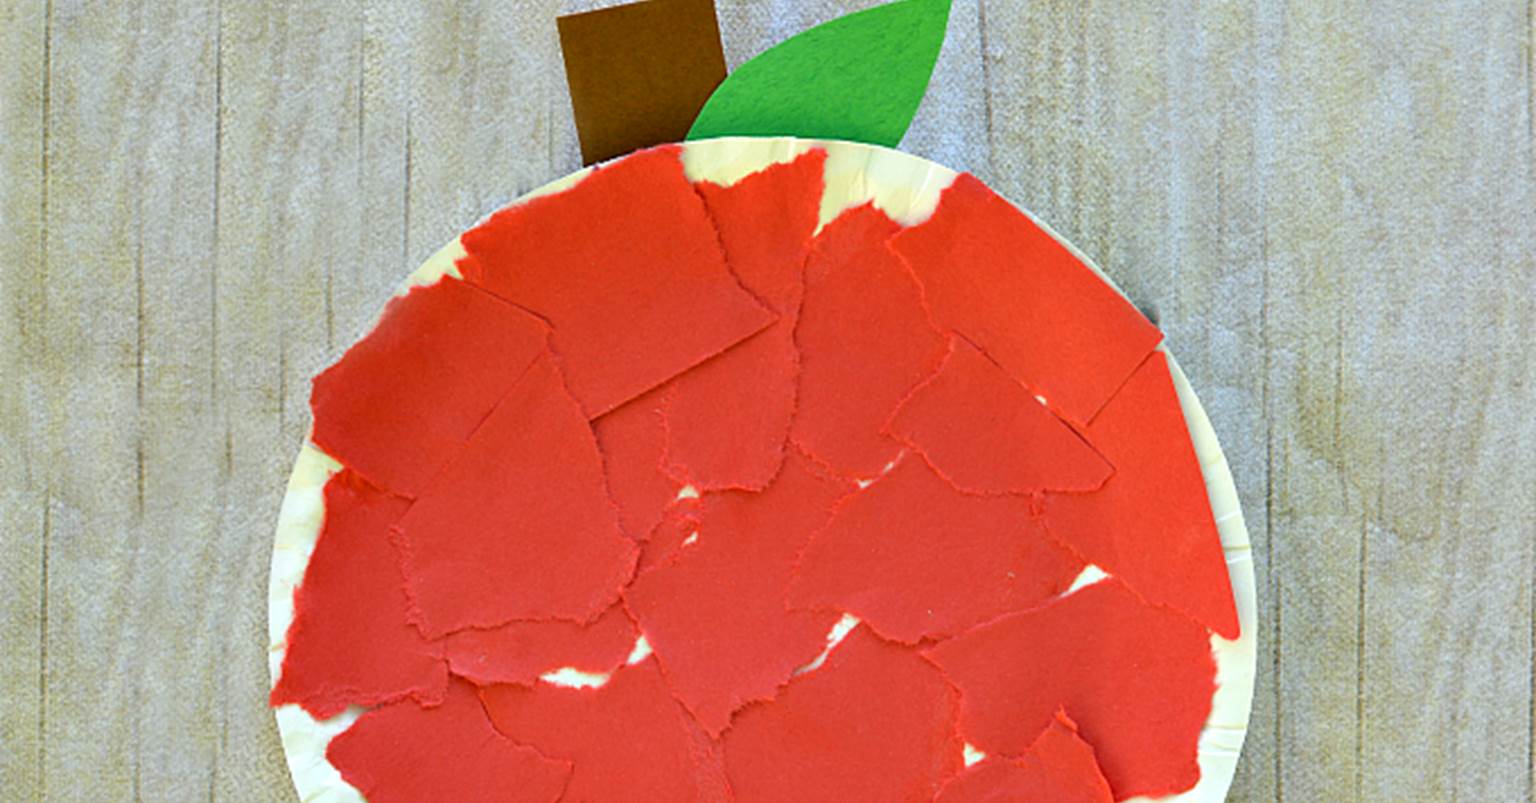 Paper Plate Apple Craft - The Kindergarten Connection1536 x 803